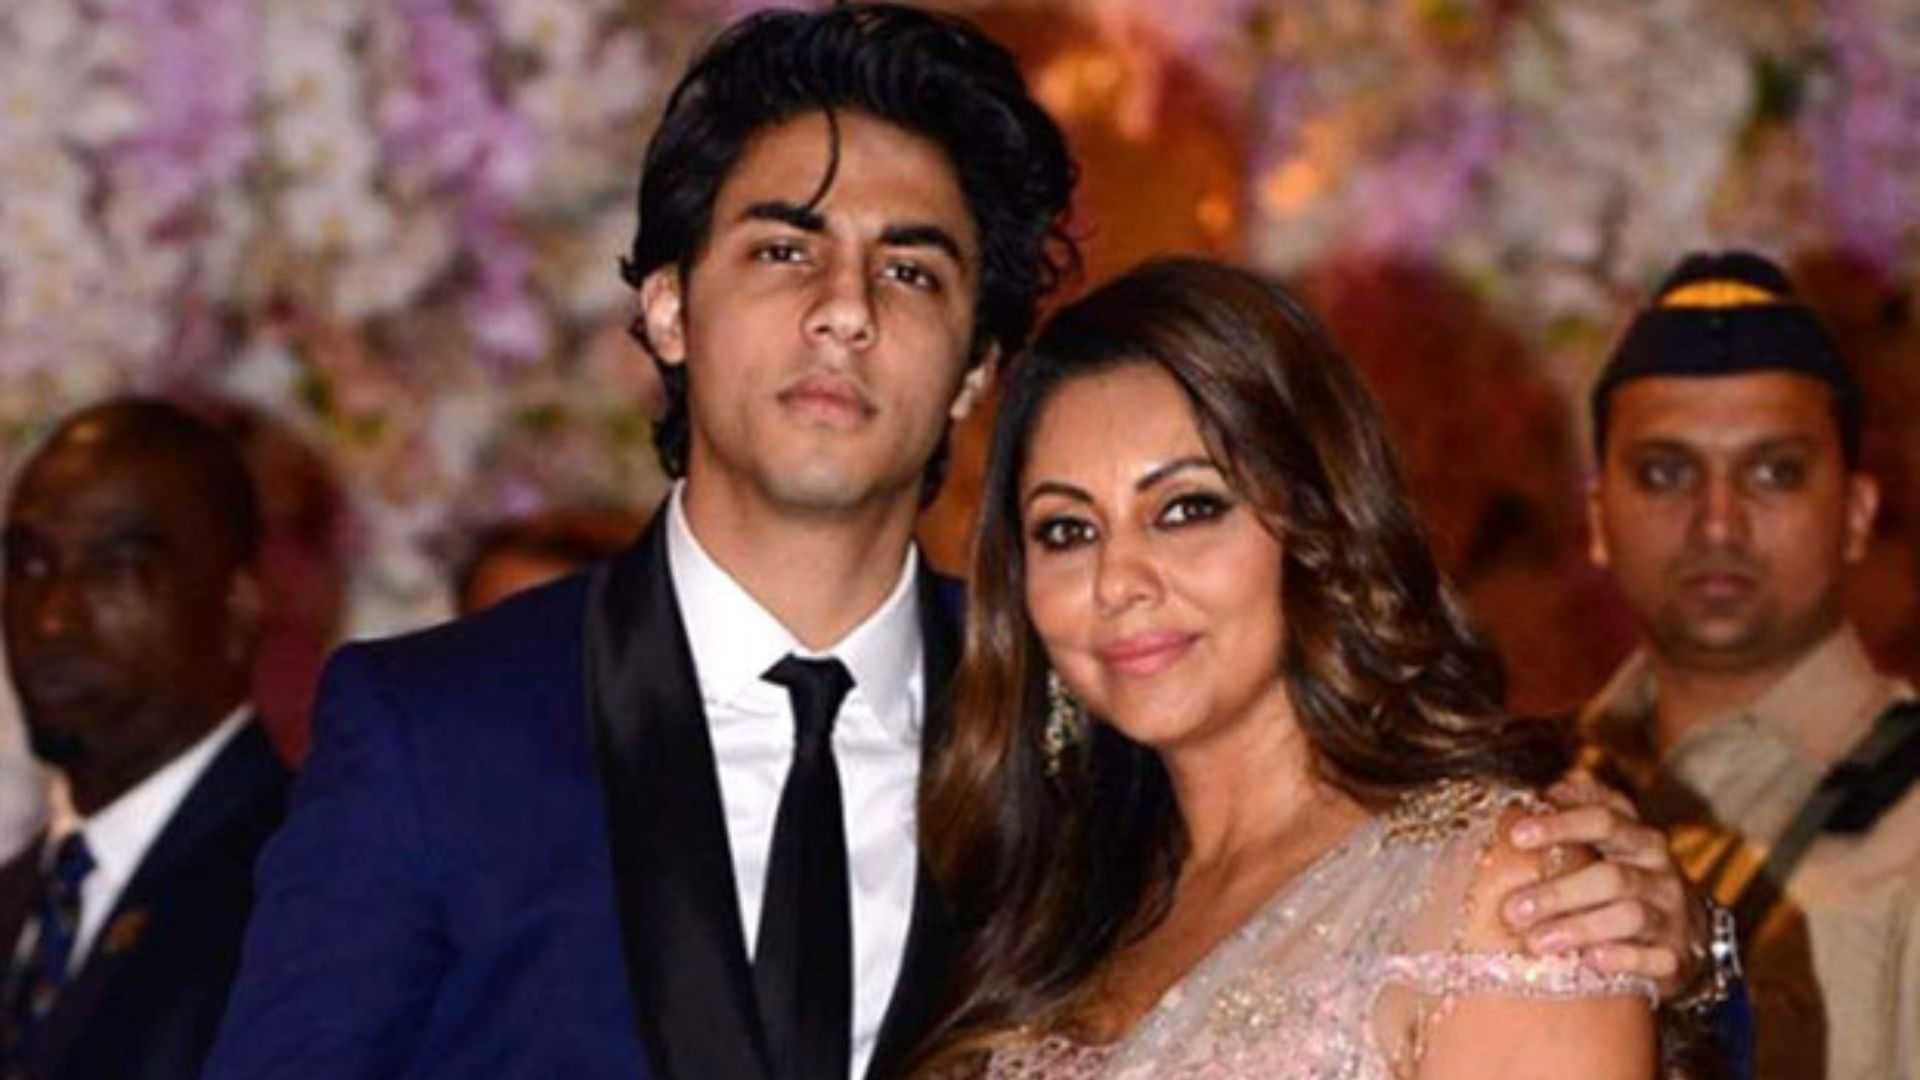 The INCIDENT which turned Aryan Khan into the fashion police for mom Gauri Khan